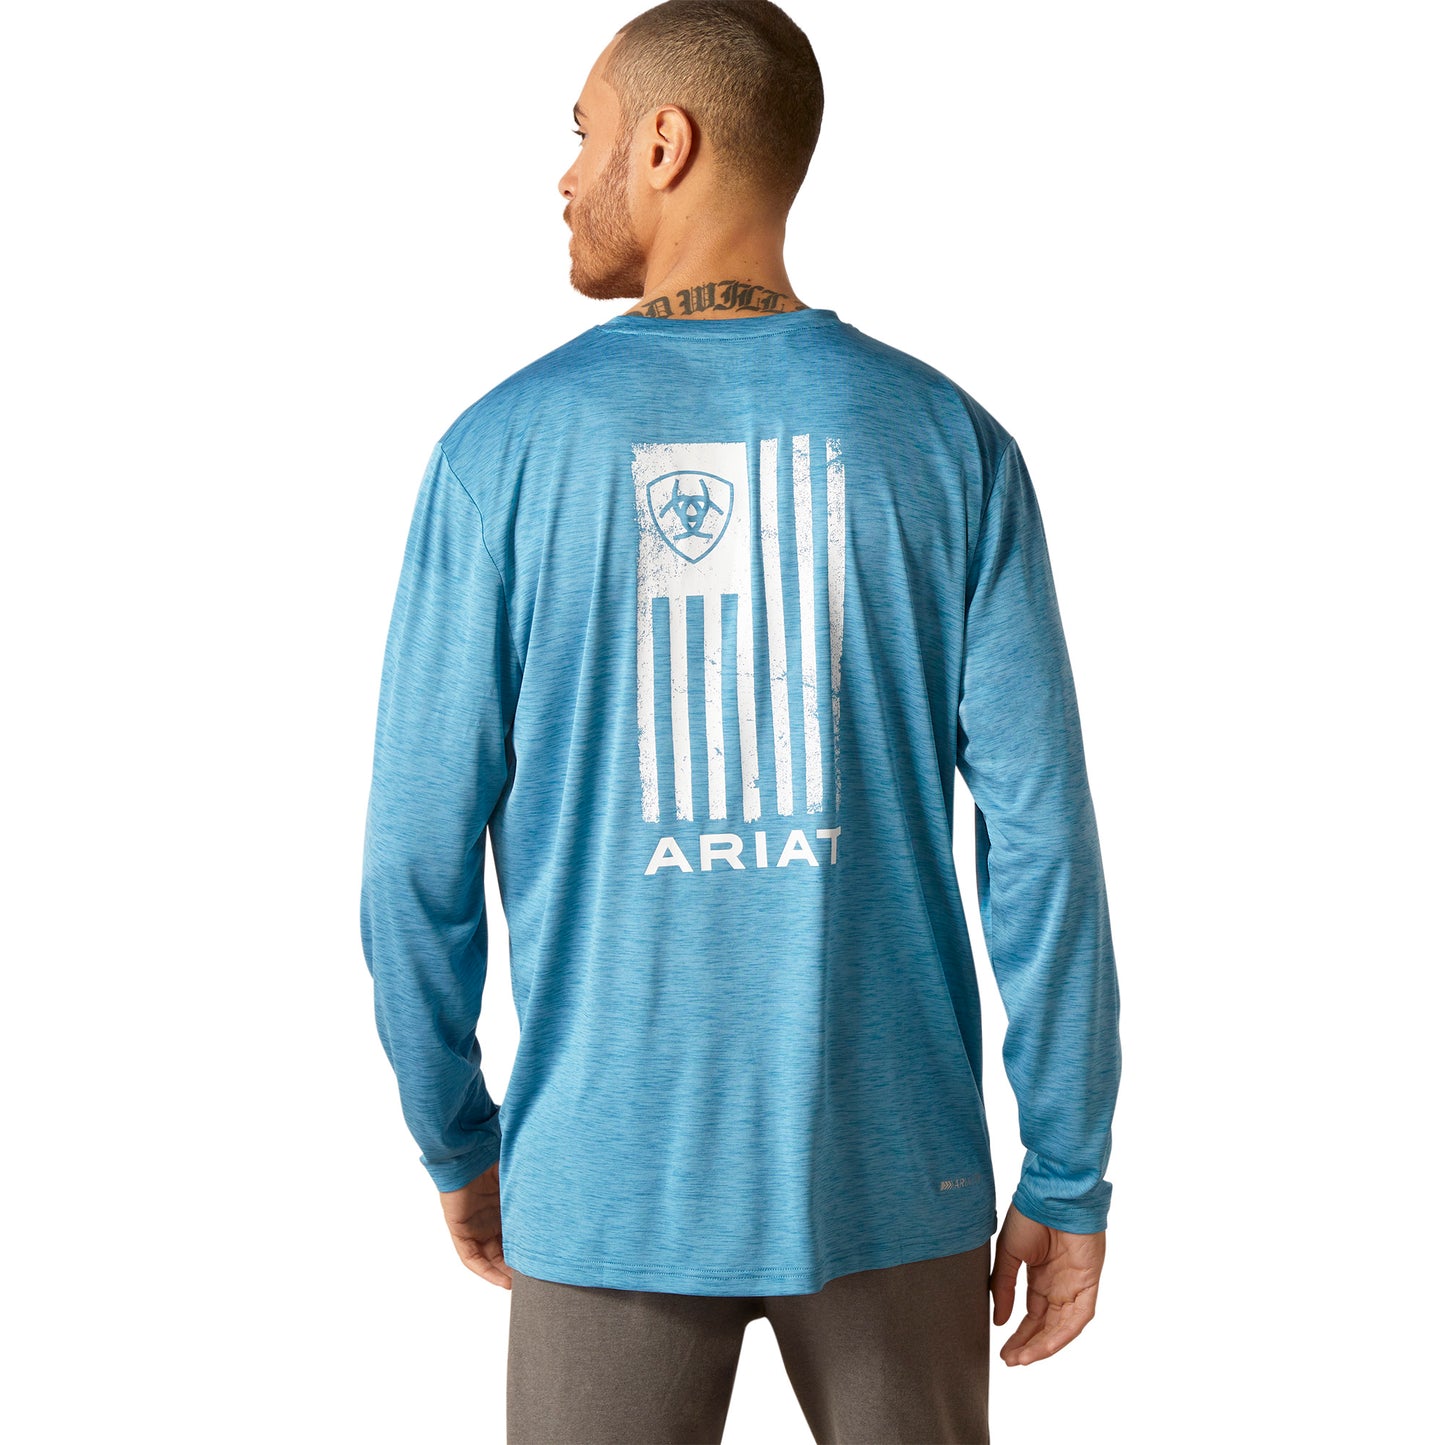 Ariat Men's Charger Faded Seaport Heather Blue T-Shirt 10046424